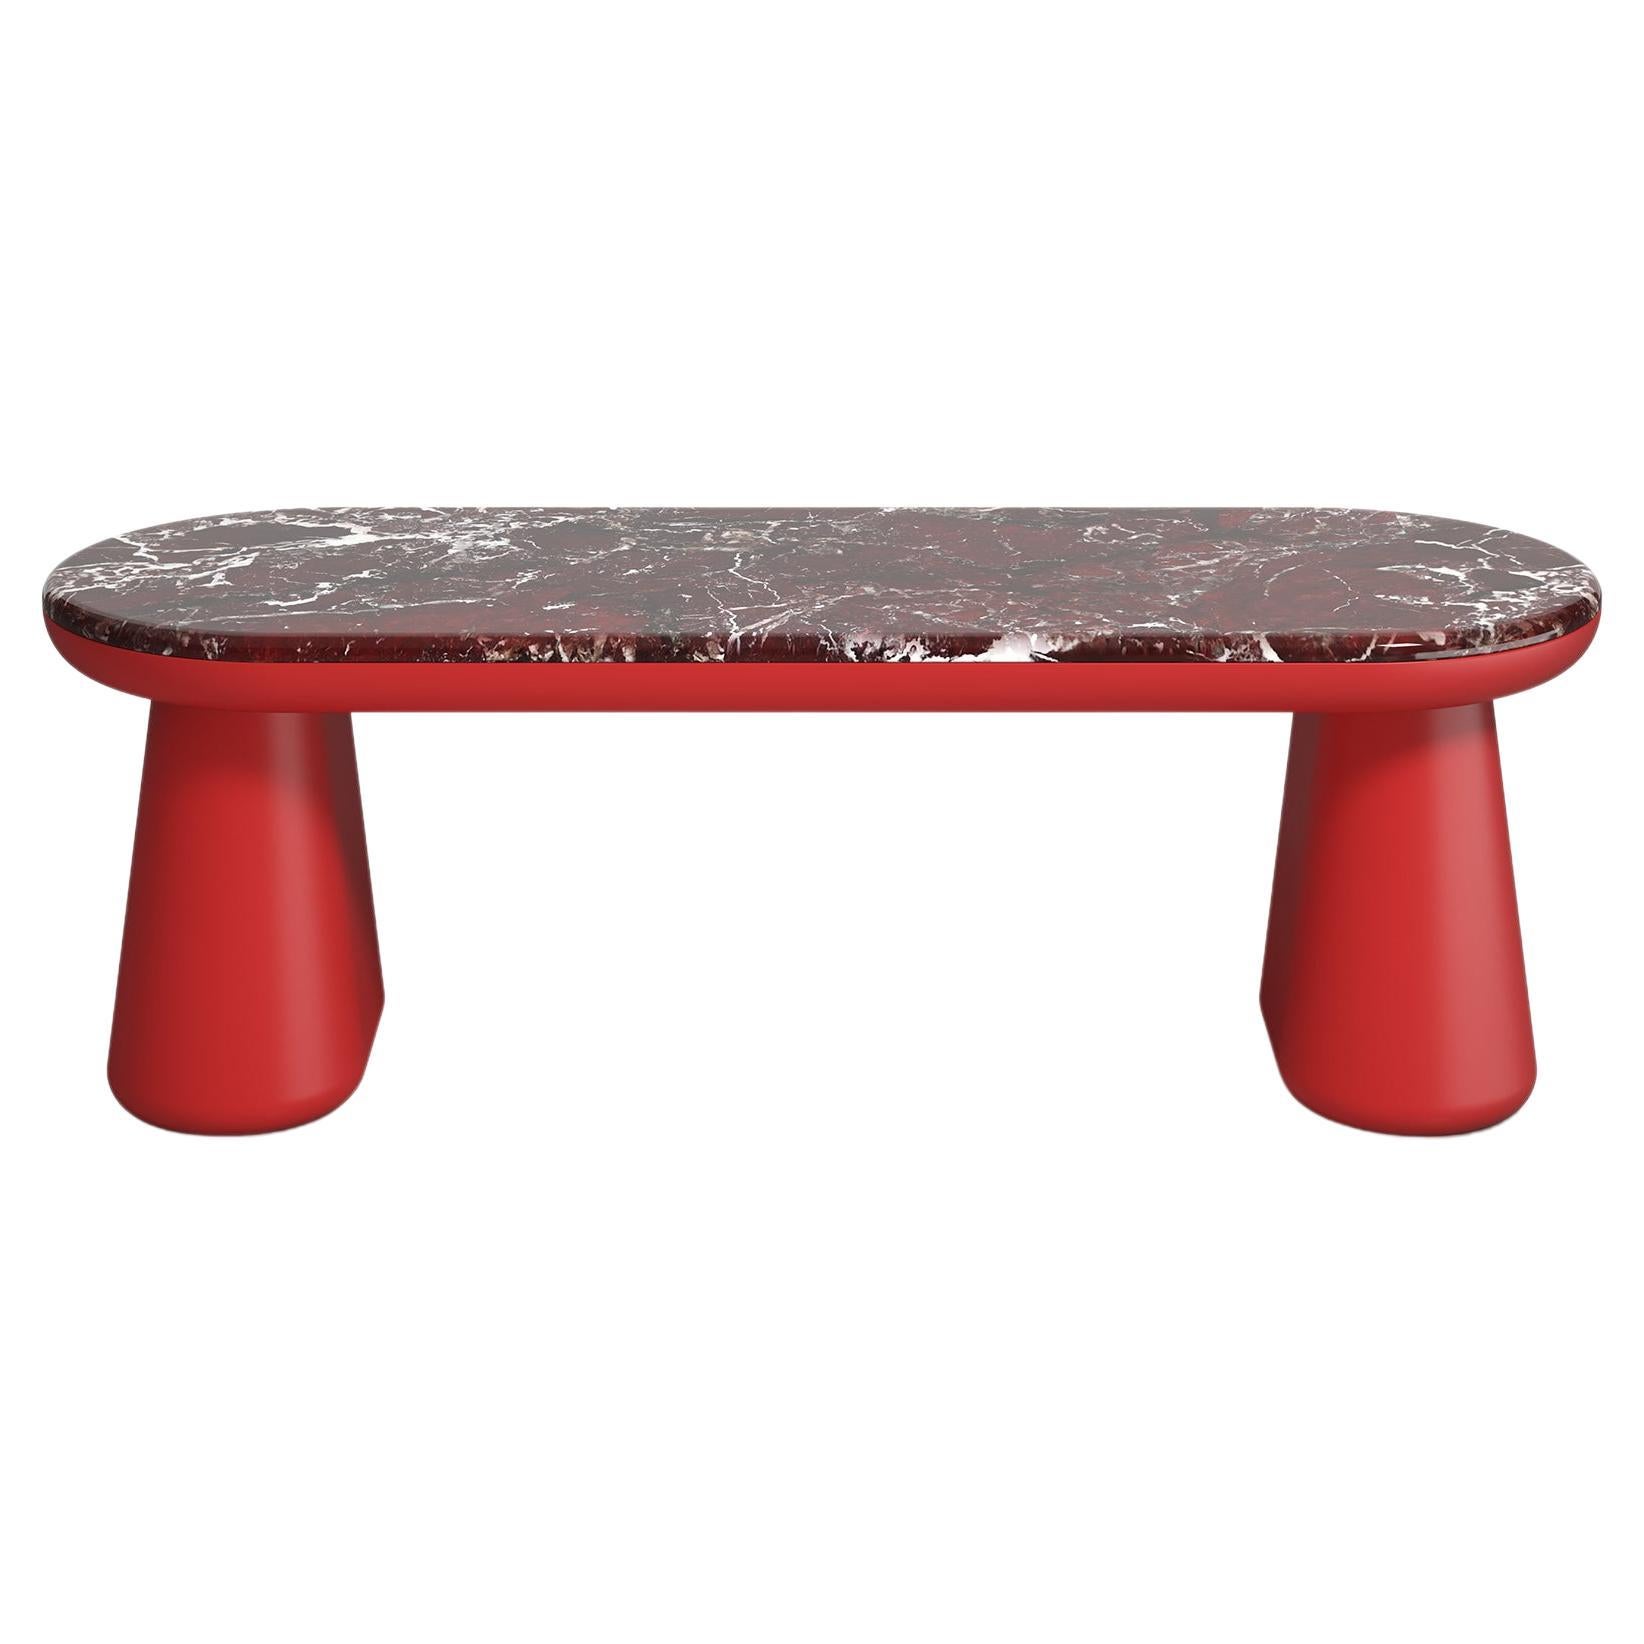 21st Century Elena Salmistraro Ione Bench Polyurethane Marble Red Scapin For Sale